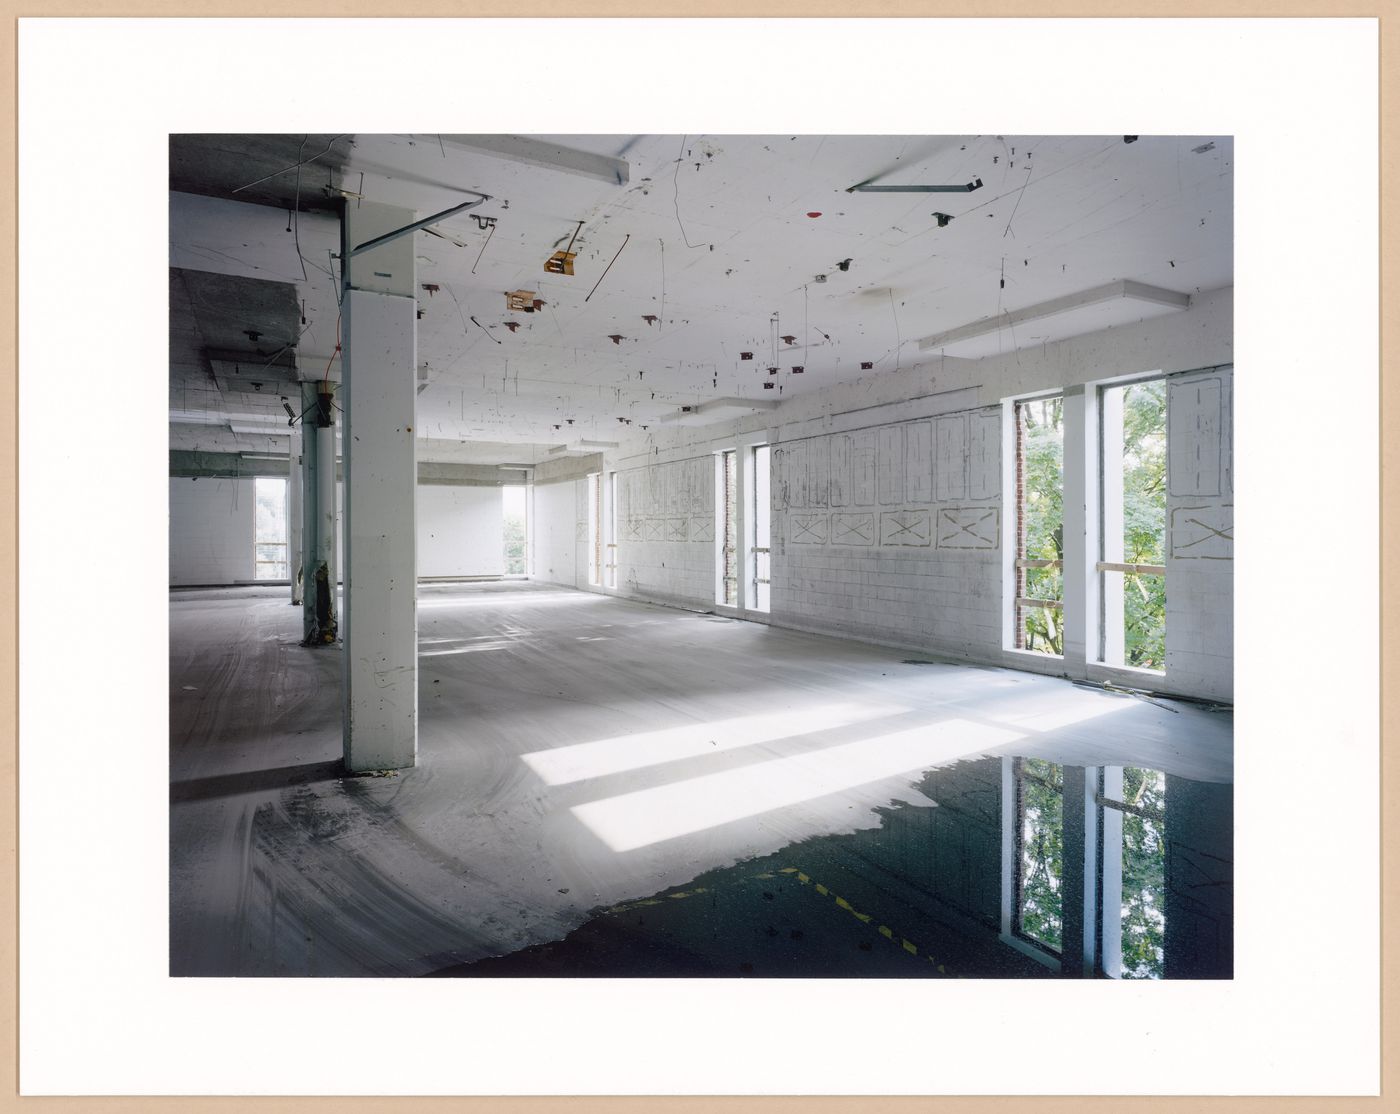 The Disappearance of Darkness: Interior of Building WI, Polaroid, Waltham, Massachusetts